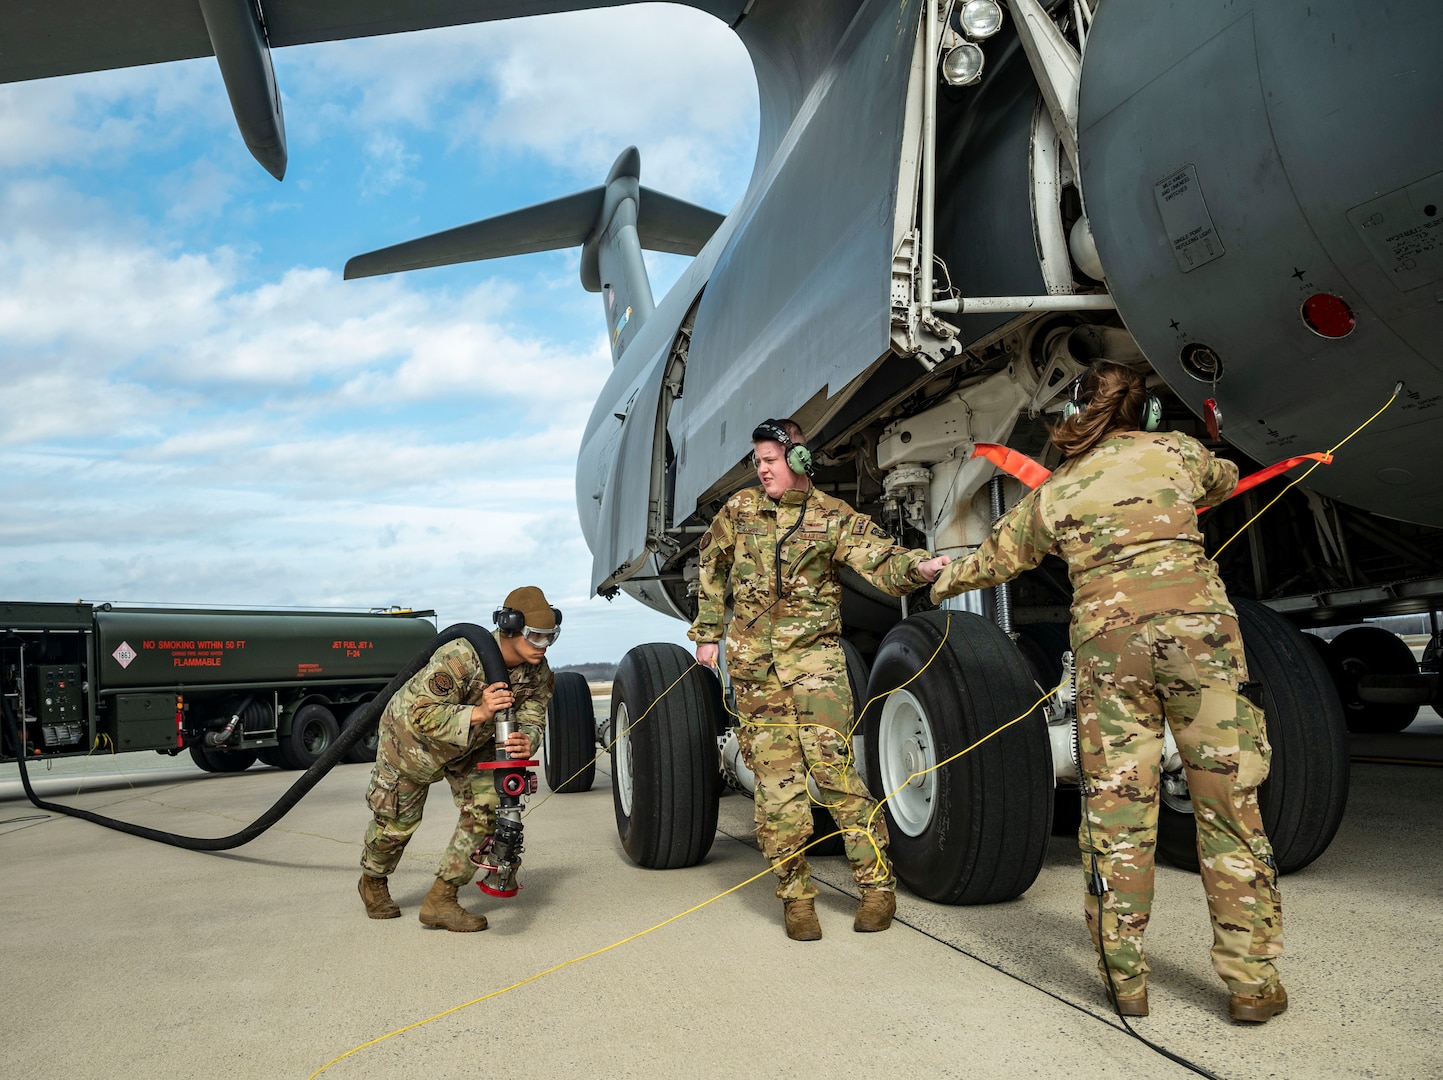 From the left, Airman 1st Class Casey Salazar 436th Logistics Readiness Squadron fuels distribution operator, Senior Airman Beau Dormer, 9th Airlift Squadron loadmaster, and Staff Sgt. Amelia Bradfield, 9th AS loadmaster, prepare to attach a fuel hose from an R-11 Refueler onto a C-5M Super Galaxy during a wet wing defuel at Dover Air Force Base, Delaware, March 1, 2023. Aircrew with the 9th AS test out new capabilities that allow the C-5 to act as a mobile fuel station and deposit fuel from the aircraft fuel tanks, into tankers standing by. (U.S. Air Force photo by Staff Sgt. Marco A. Gomez)